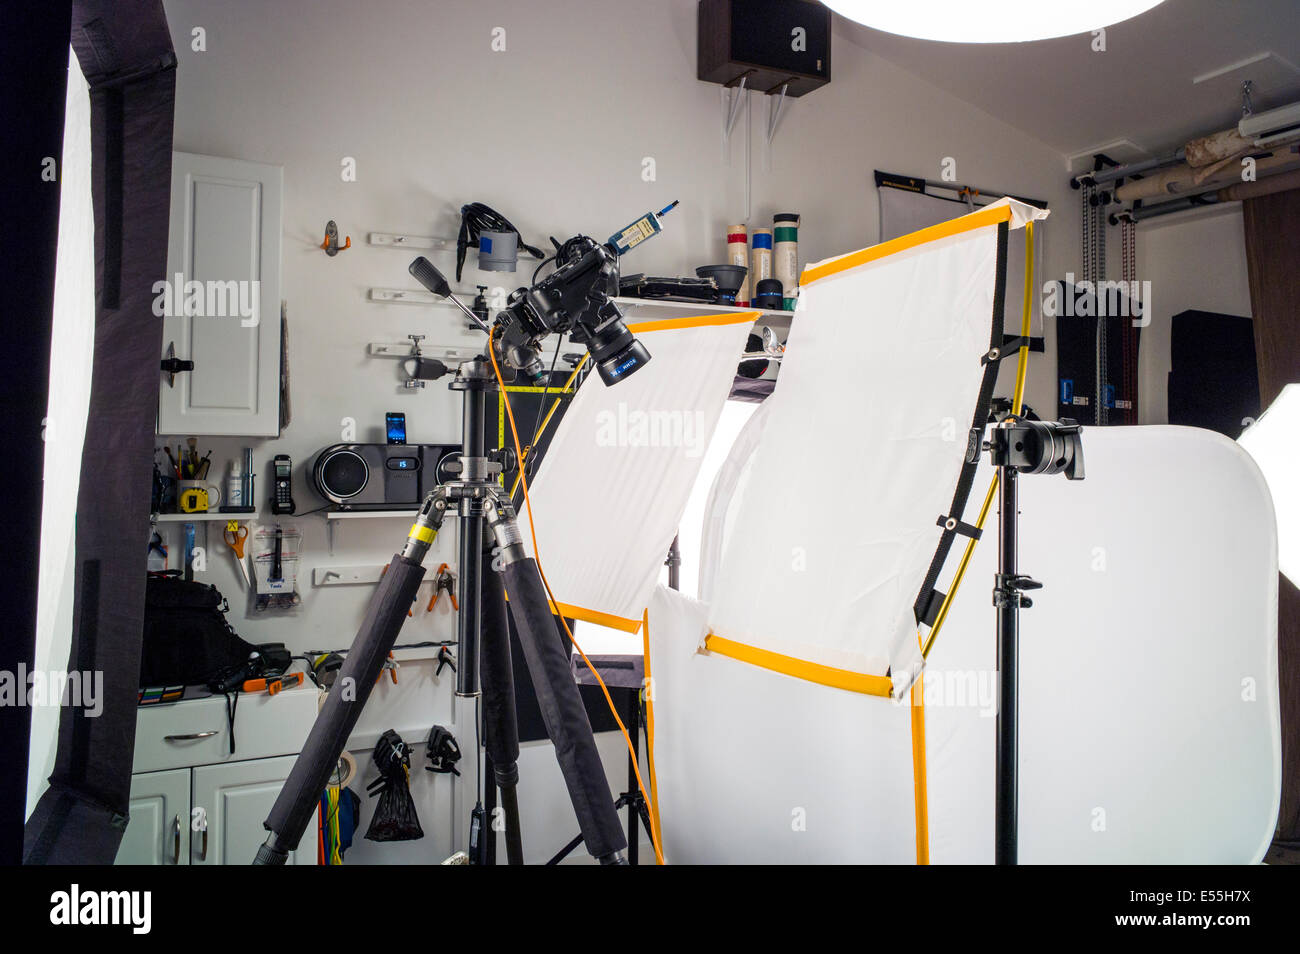 Commercial photography studio, including lighting, background and grip gear. Stock Photo